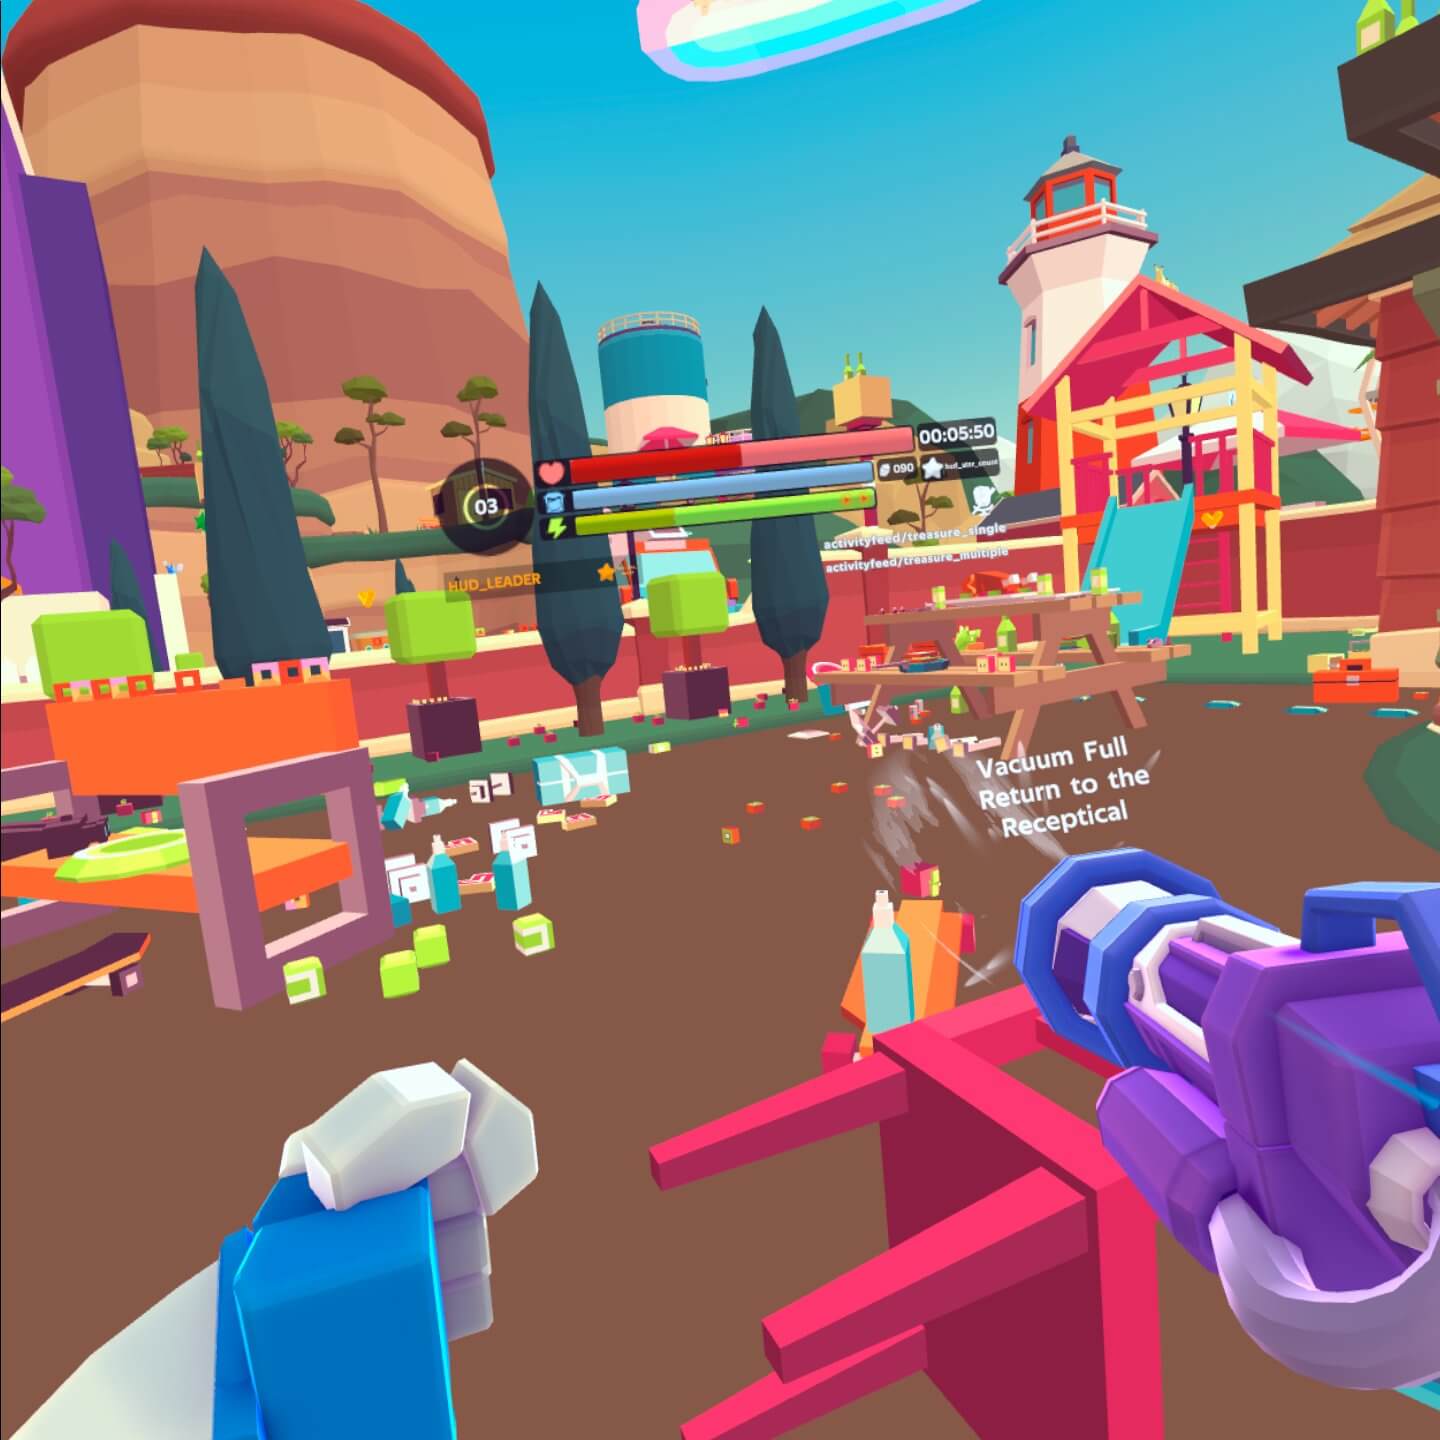 Screenshot of a match in Suck It. It shows a variety of items from chairs, to cans tossed and spread out on the floor. 